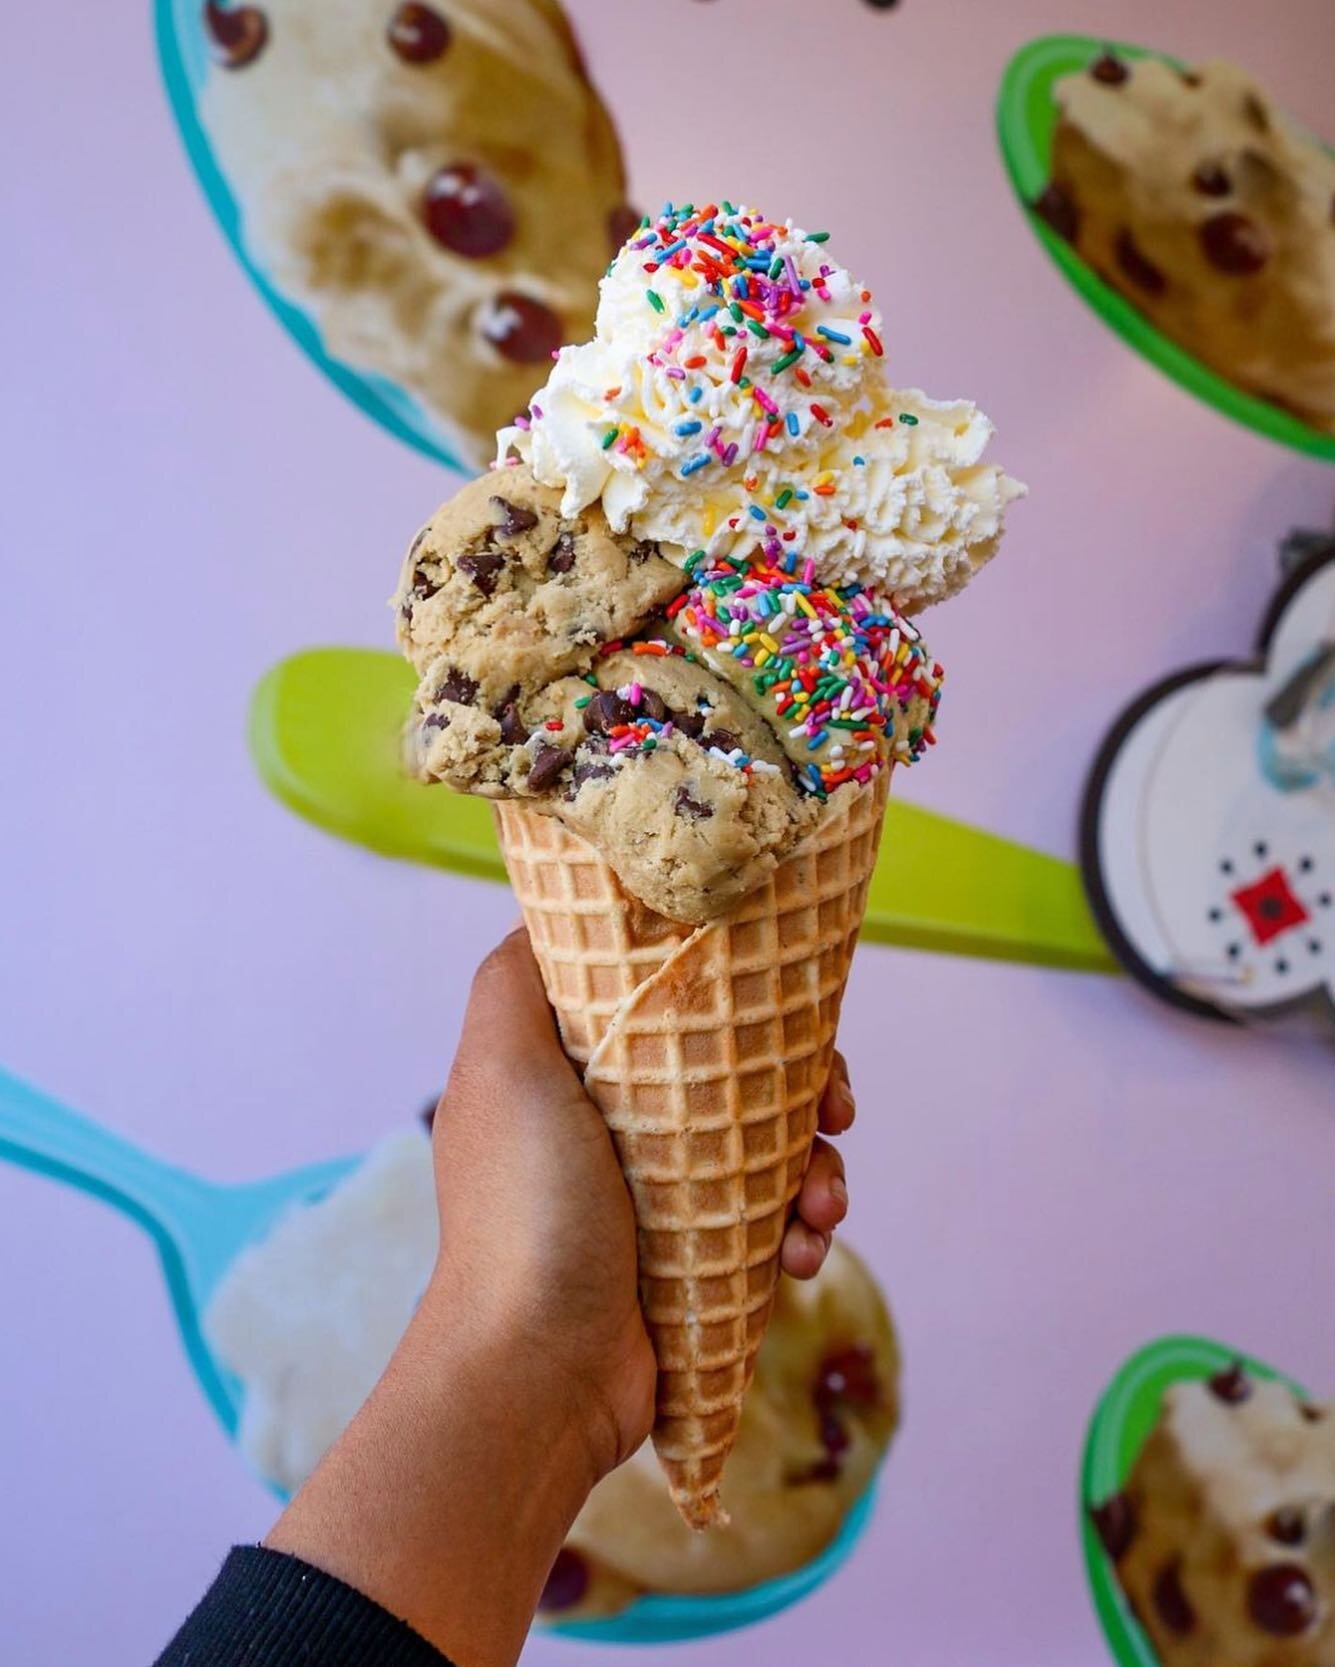 Here&rsquo;s the scoop: A sweeter weekend starts at @CookieDoughDreamsLA 🍪#OvationHollywood #CookieDoughDreams